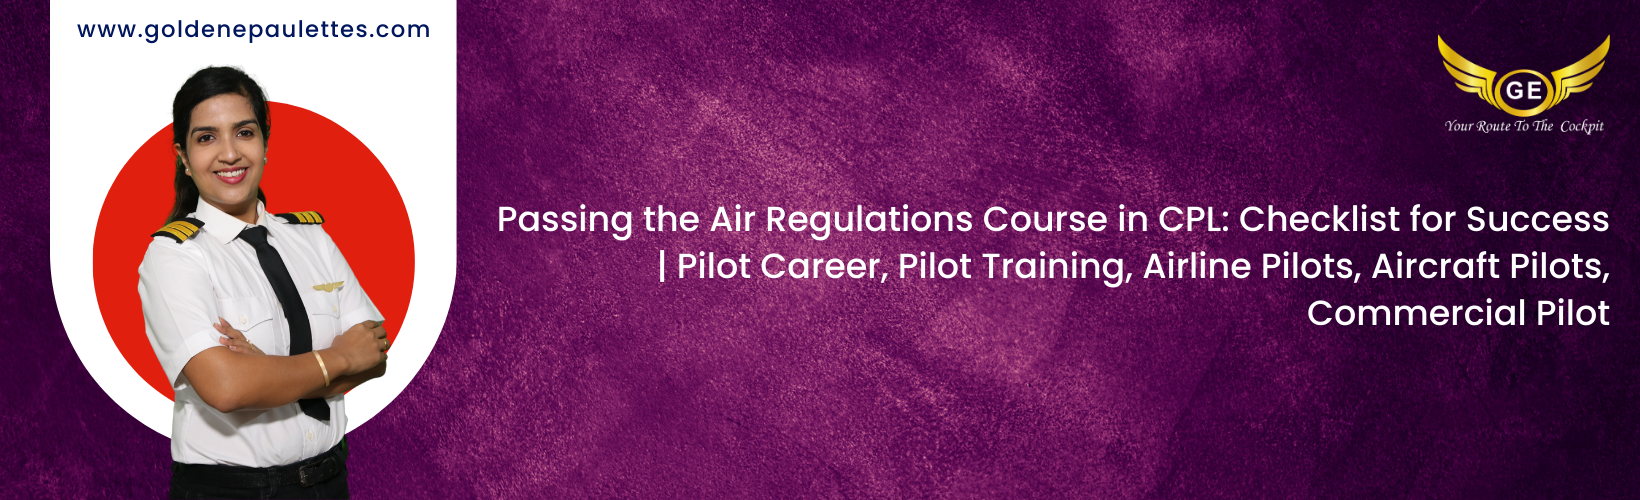 Tips for Acing the Air Regulations Course in CPL